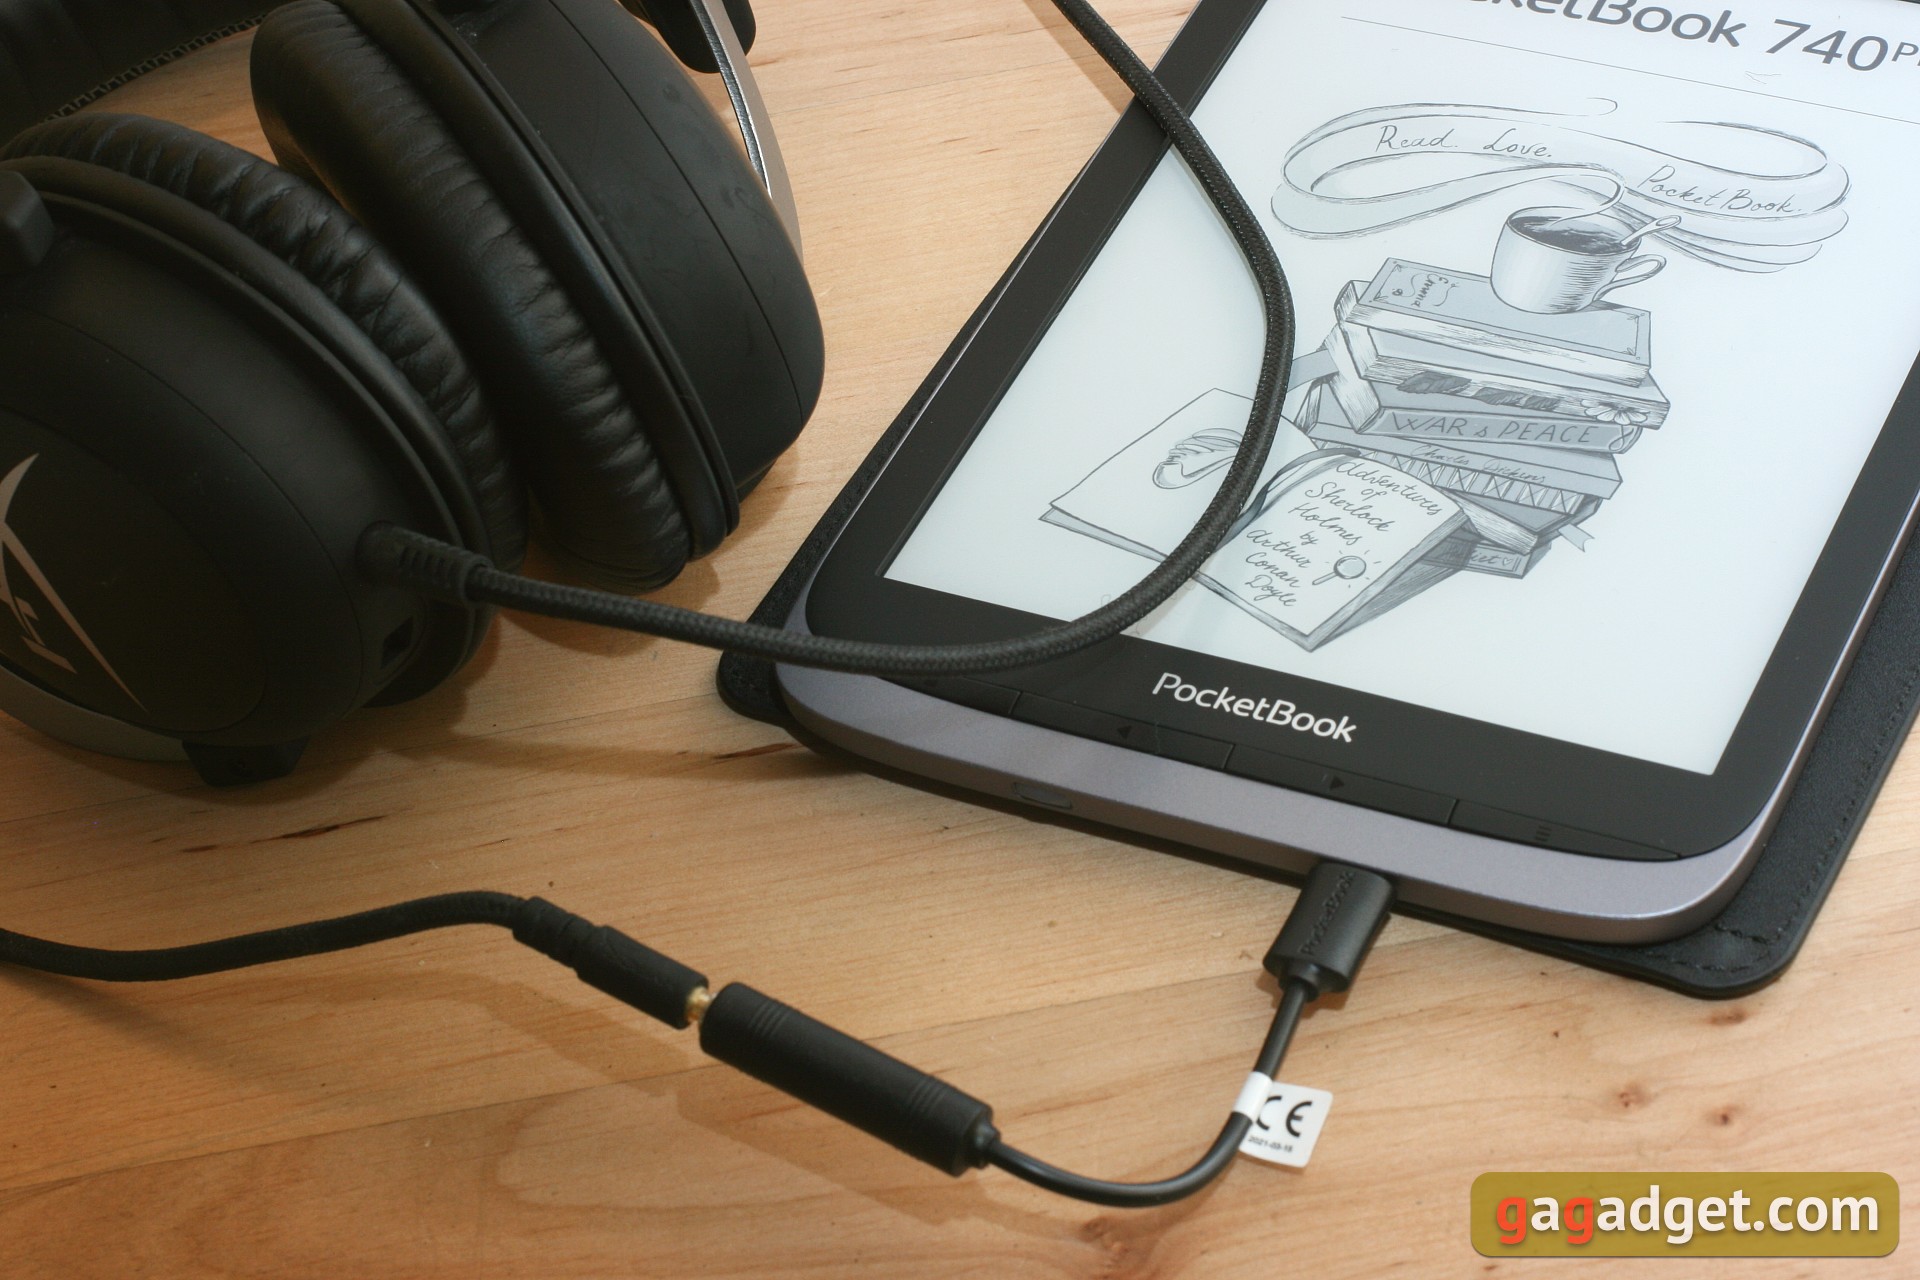 Pocketbook 740 Pro Review: Protected Reader with Audio Support-61